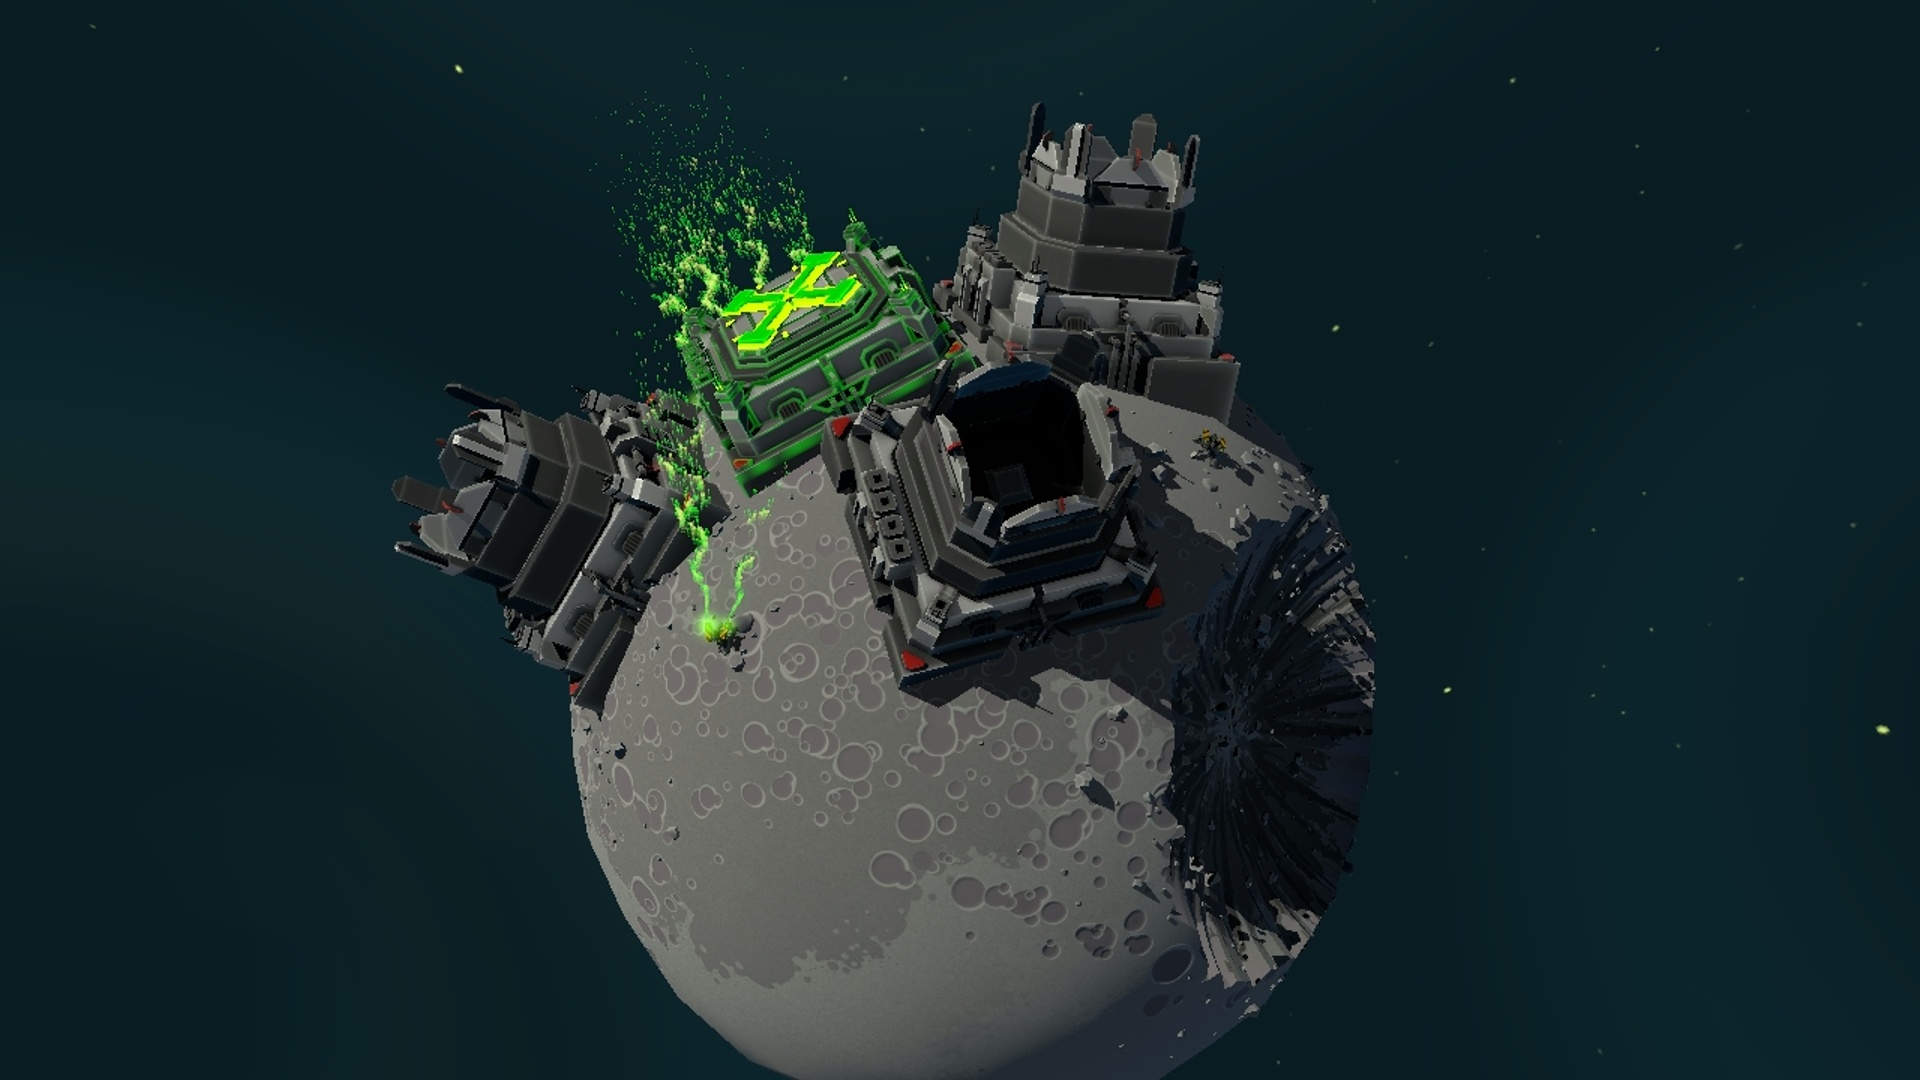 Geek insider, geekinsider, geekinsider. Com,, planetary annihilation - game review, gaming